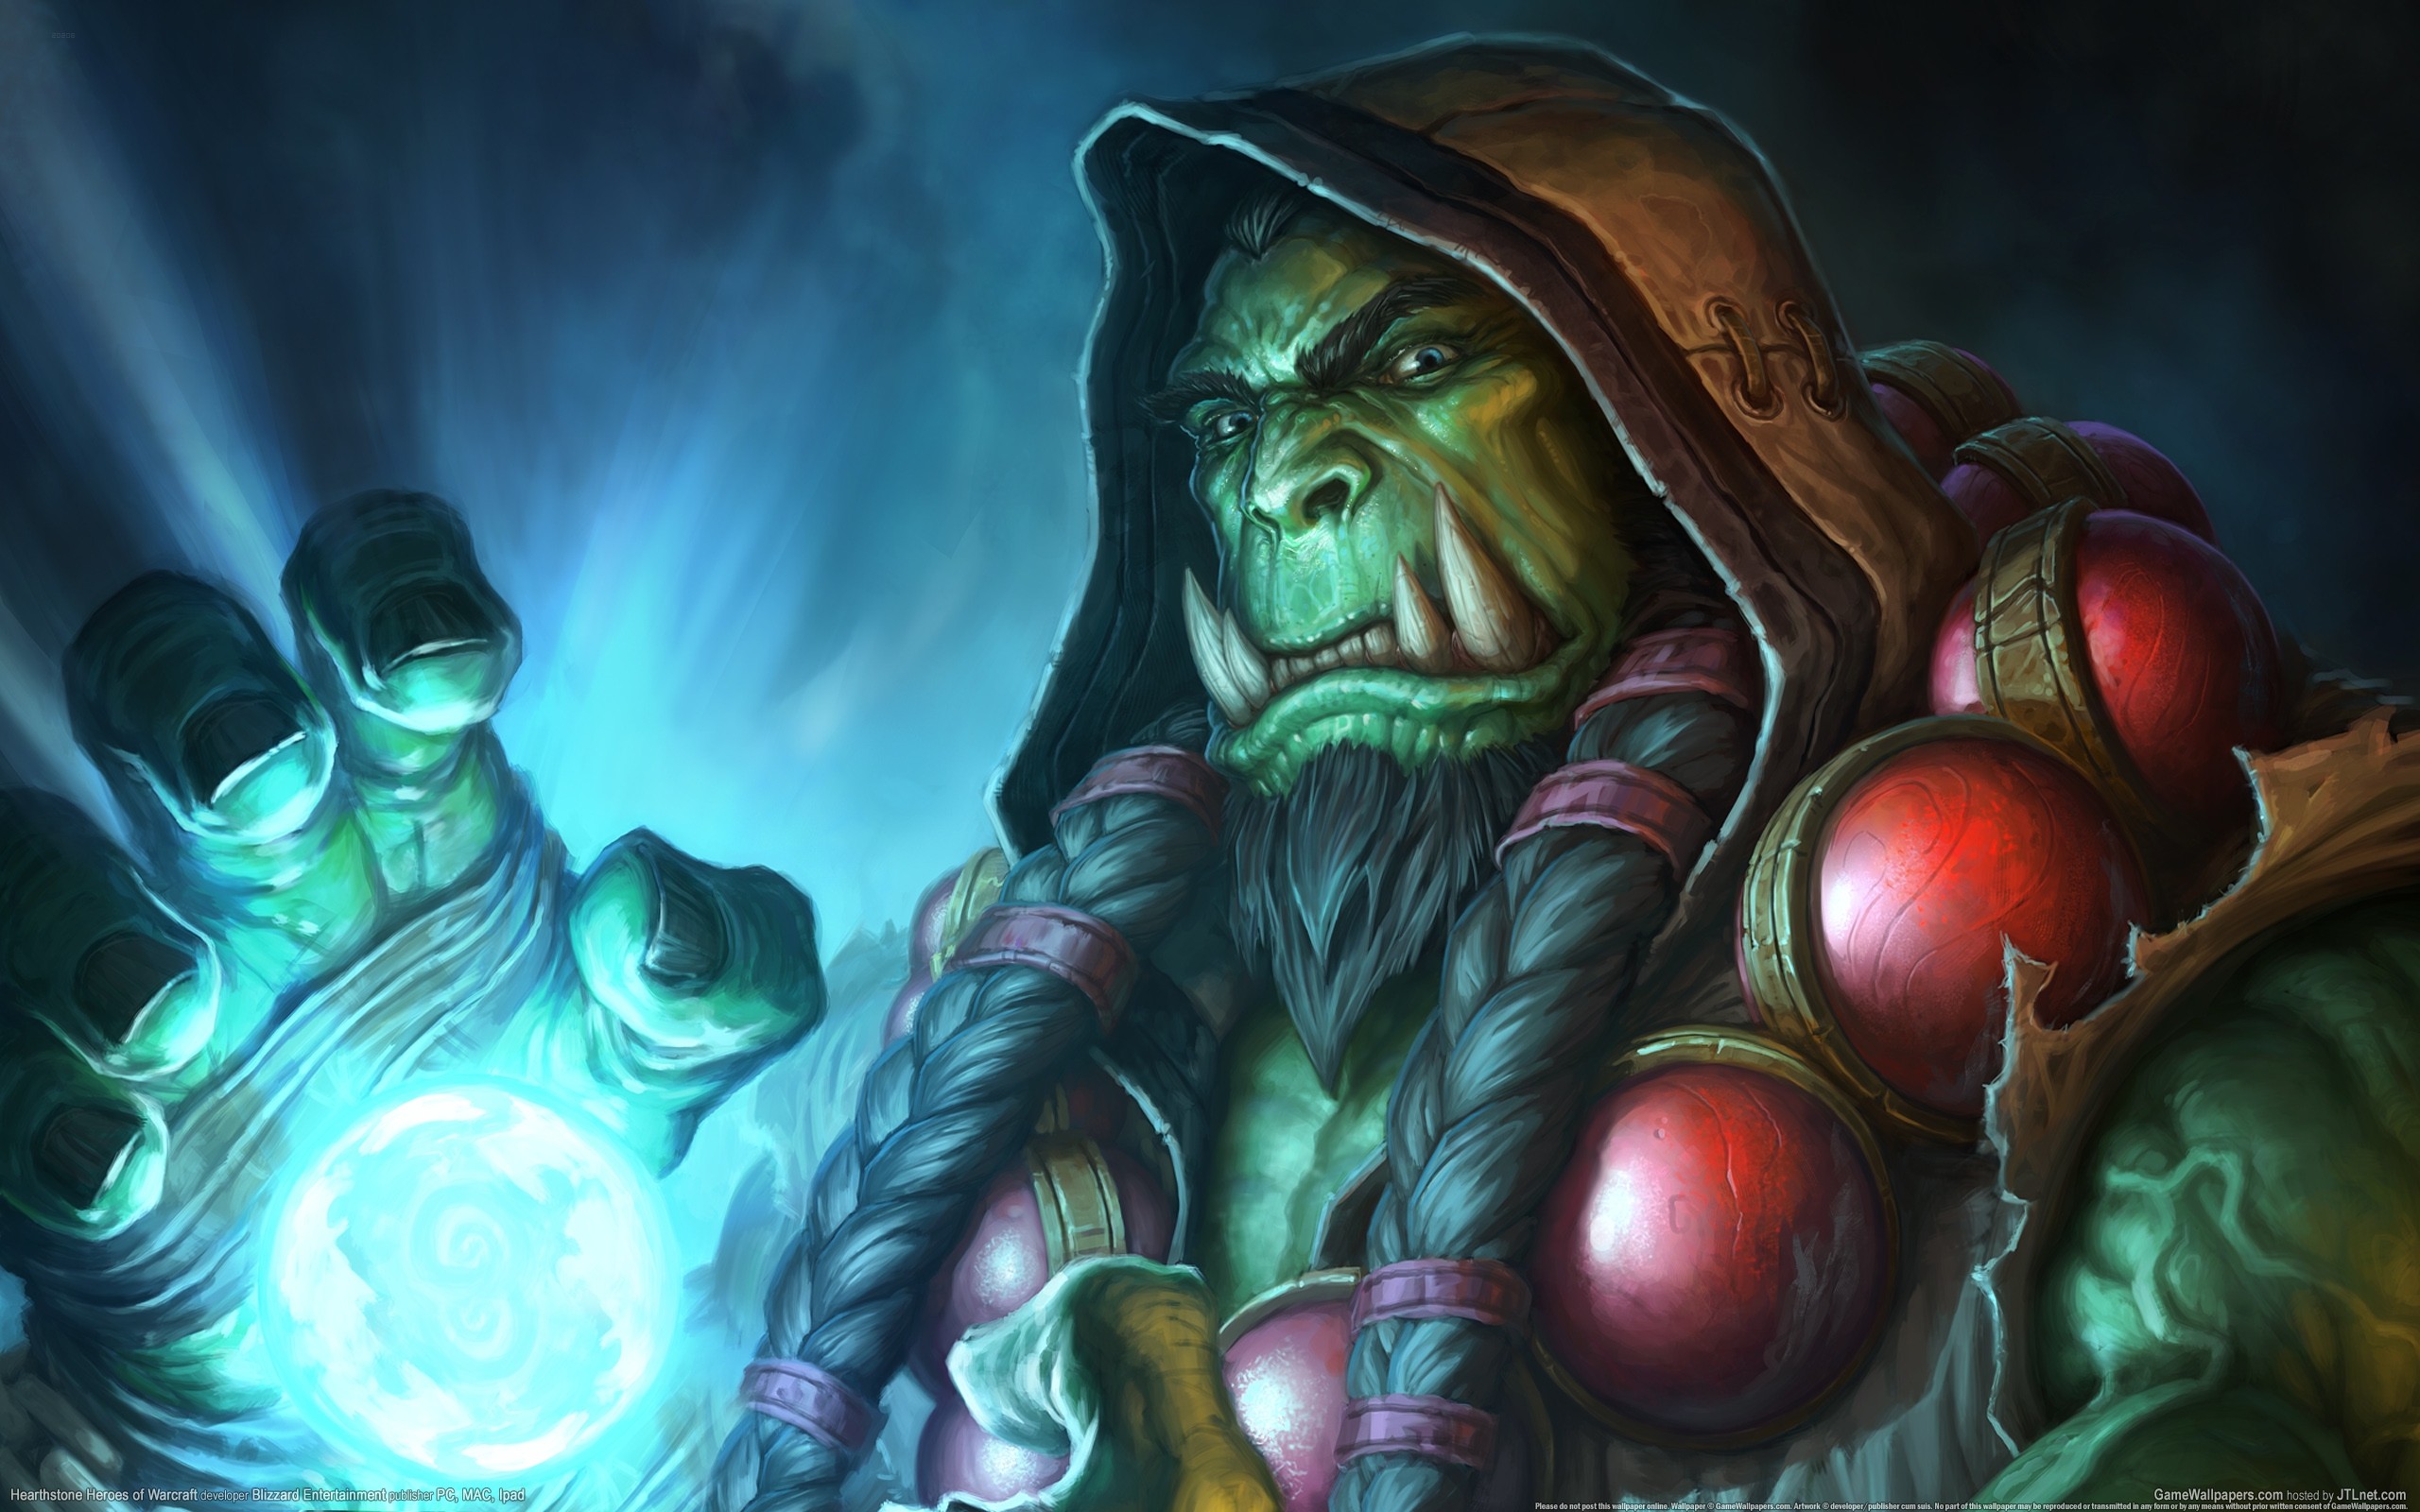 General 2560x1600 Hearthstone horde Thrall blue Hearthstone: Heroes of Warcraft PC gaming